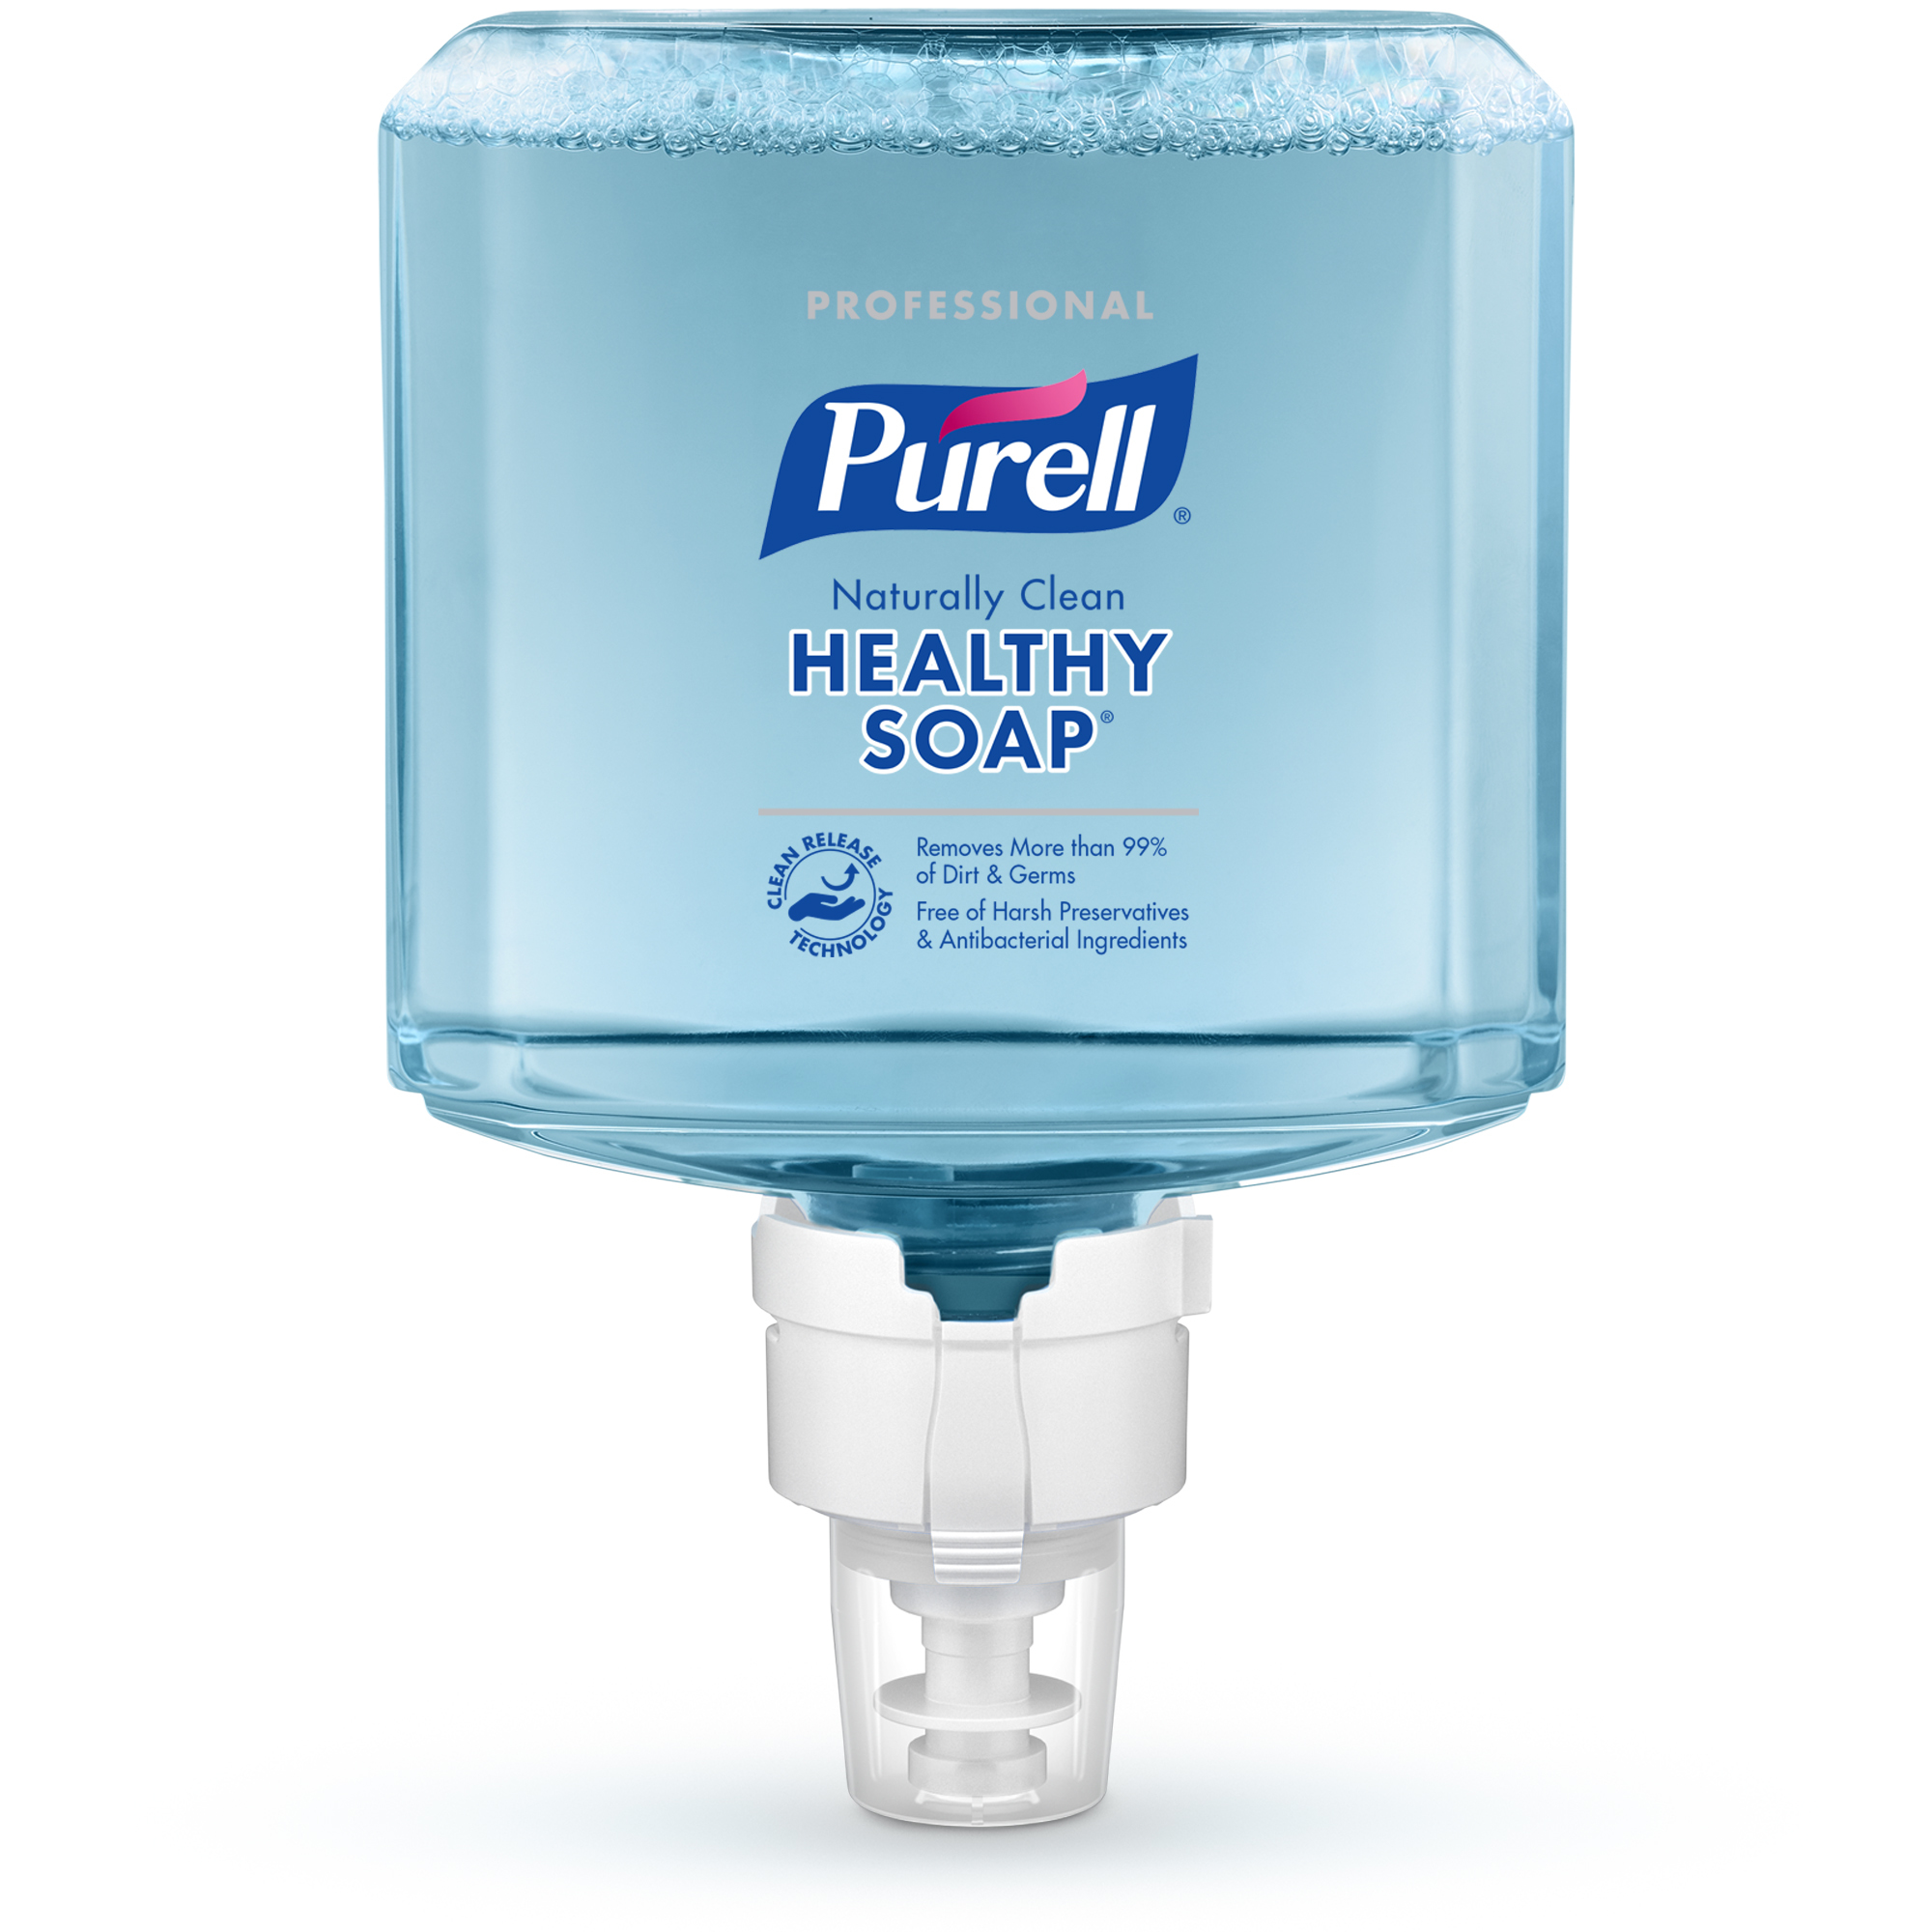 PURELL® Professional CRT HEALTHY SOAP Naturally Clean Foam 1200 mL